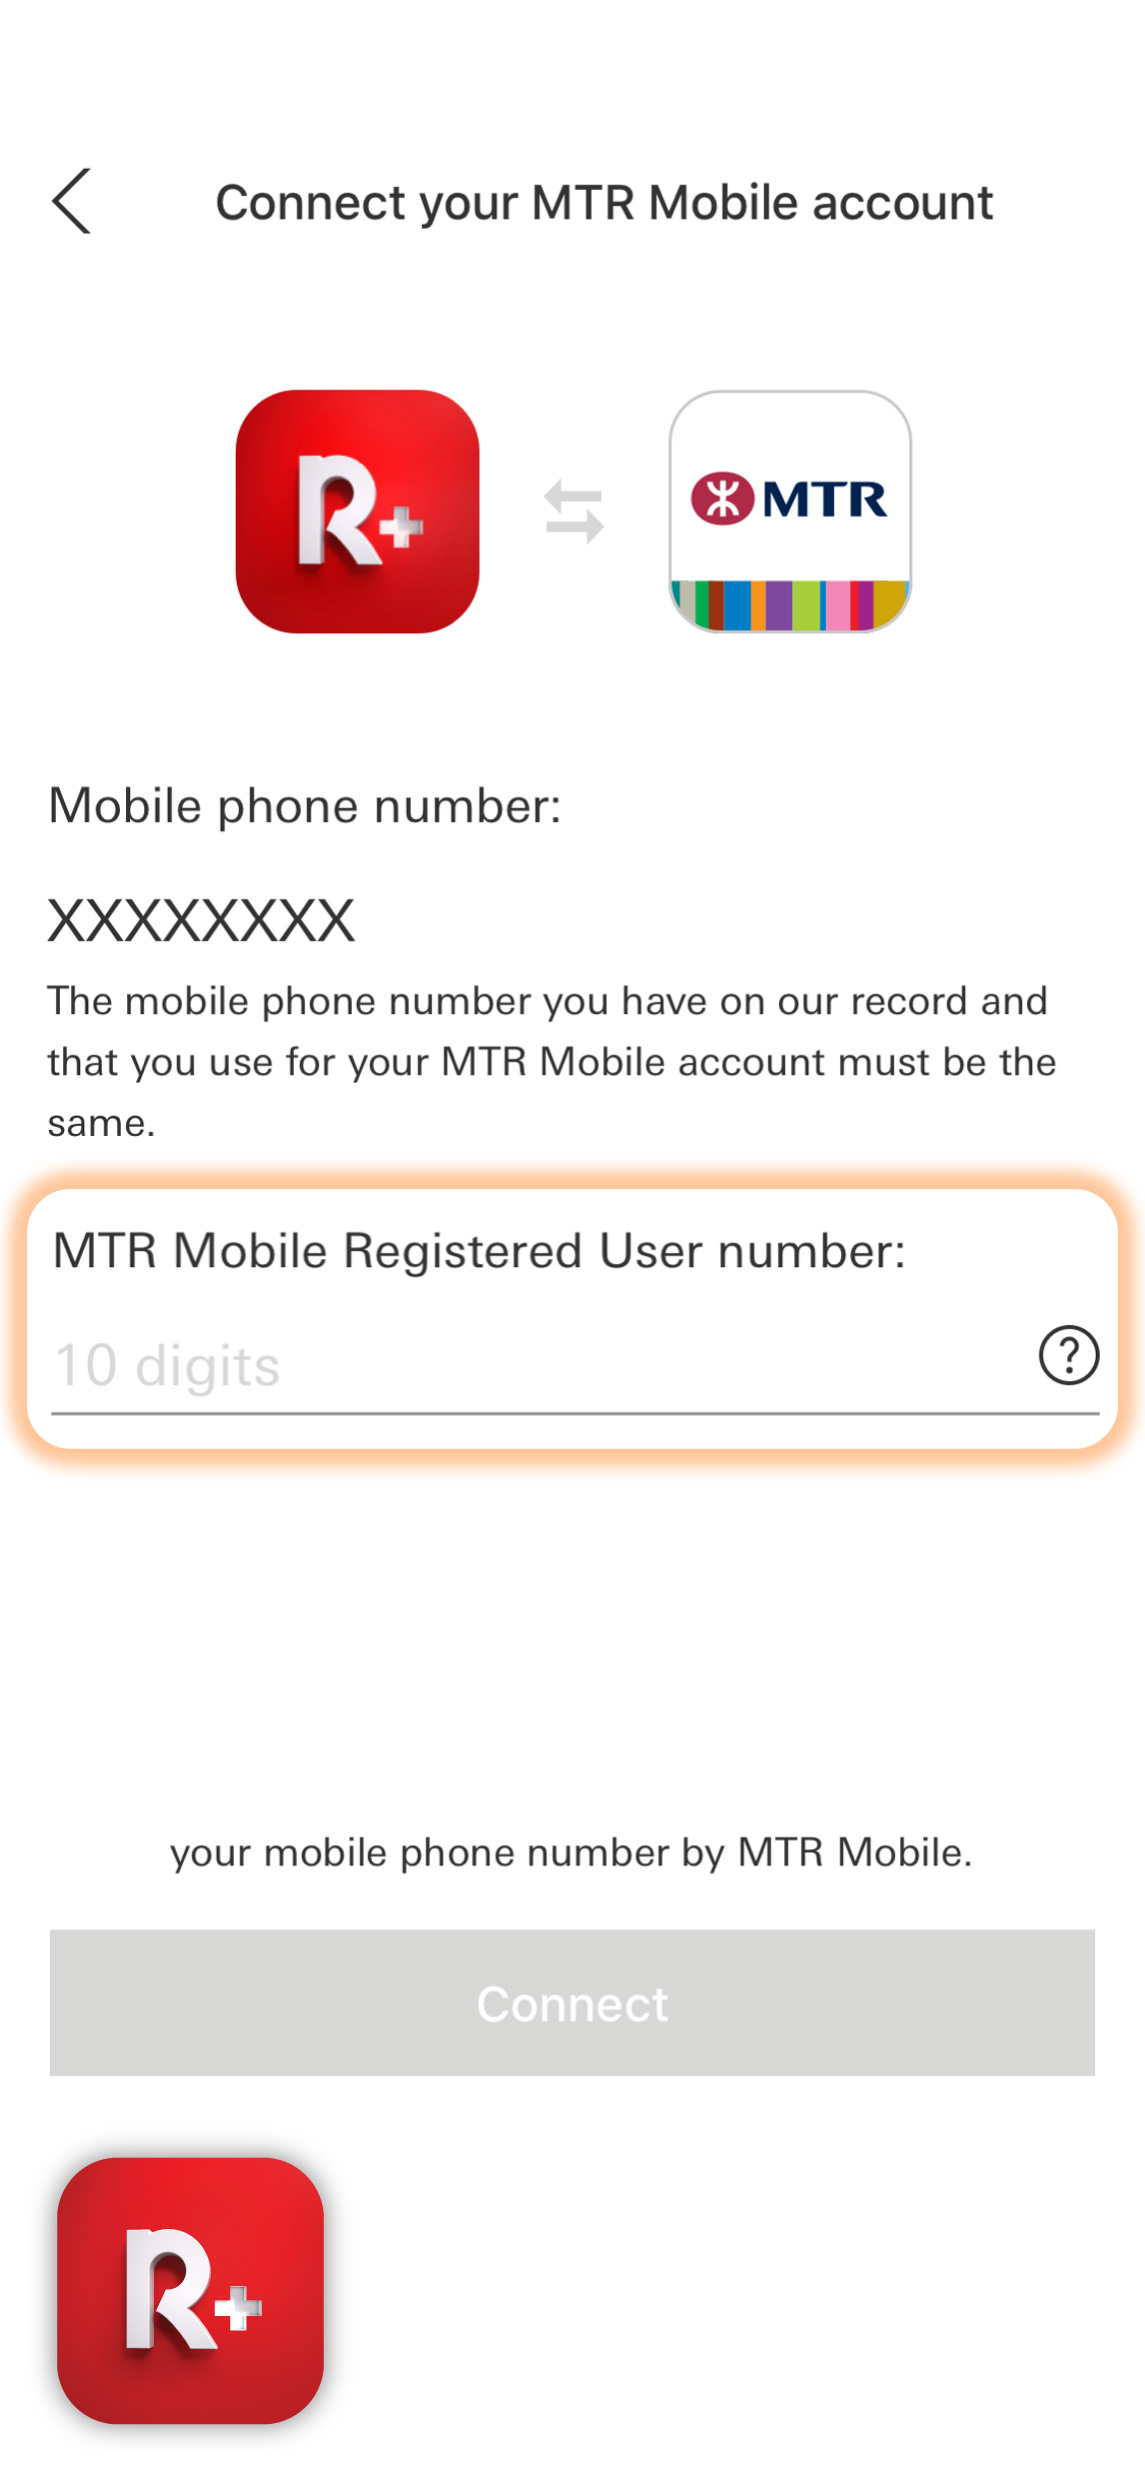 Enter the MTR Mobile account number and enter the one-time verification code sent to your mobile phone to complete the connecting account